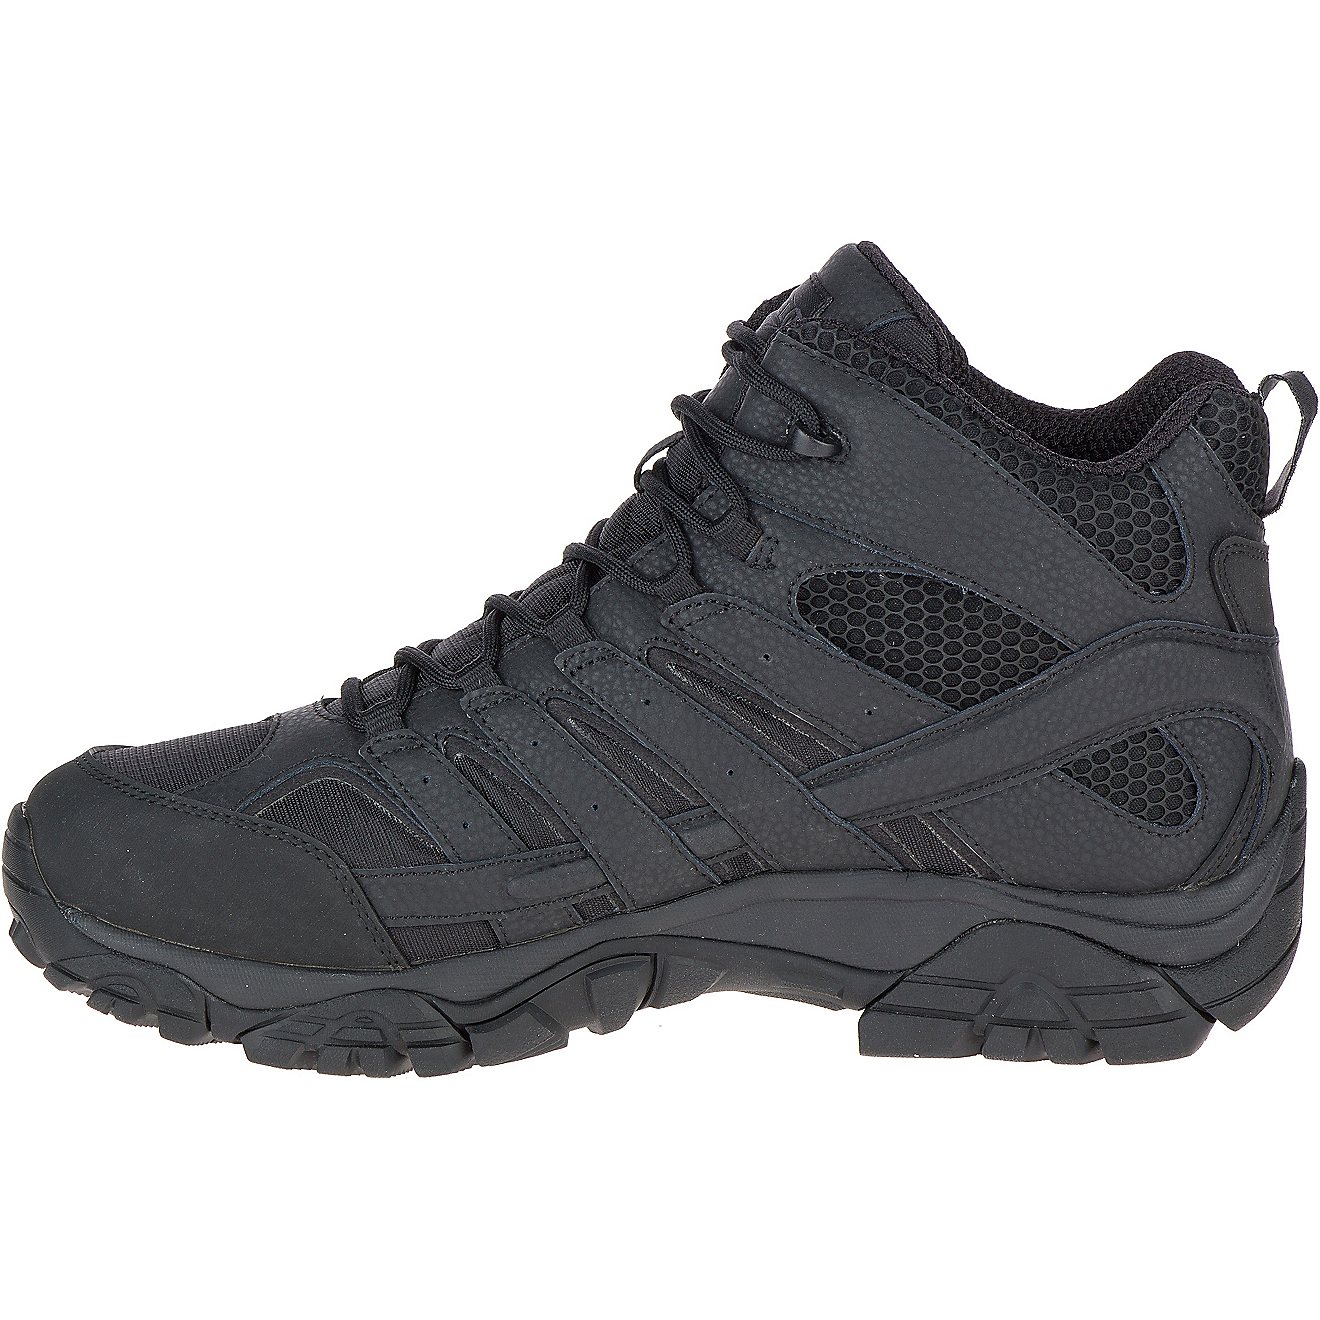 Merrell Men's MOAB 2 Mid EH Tactical Boots                                                                                       - view number 3